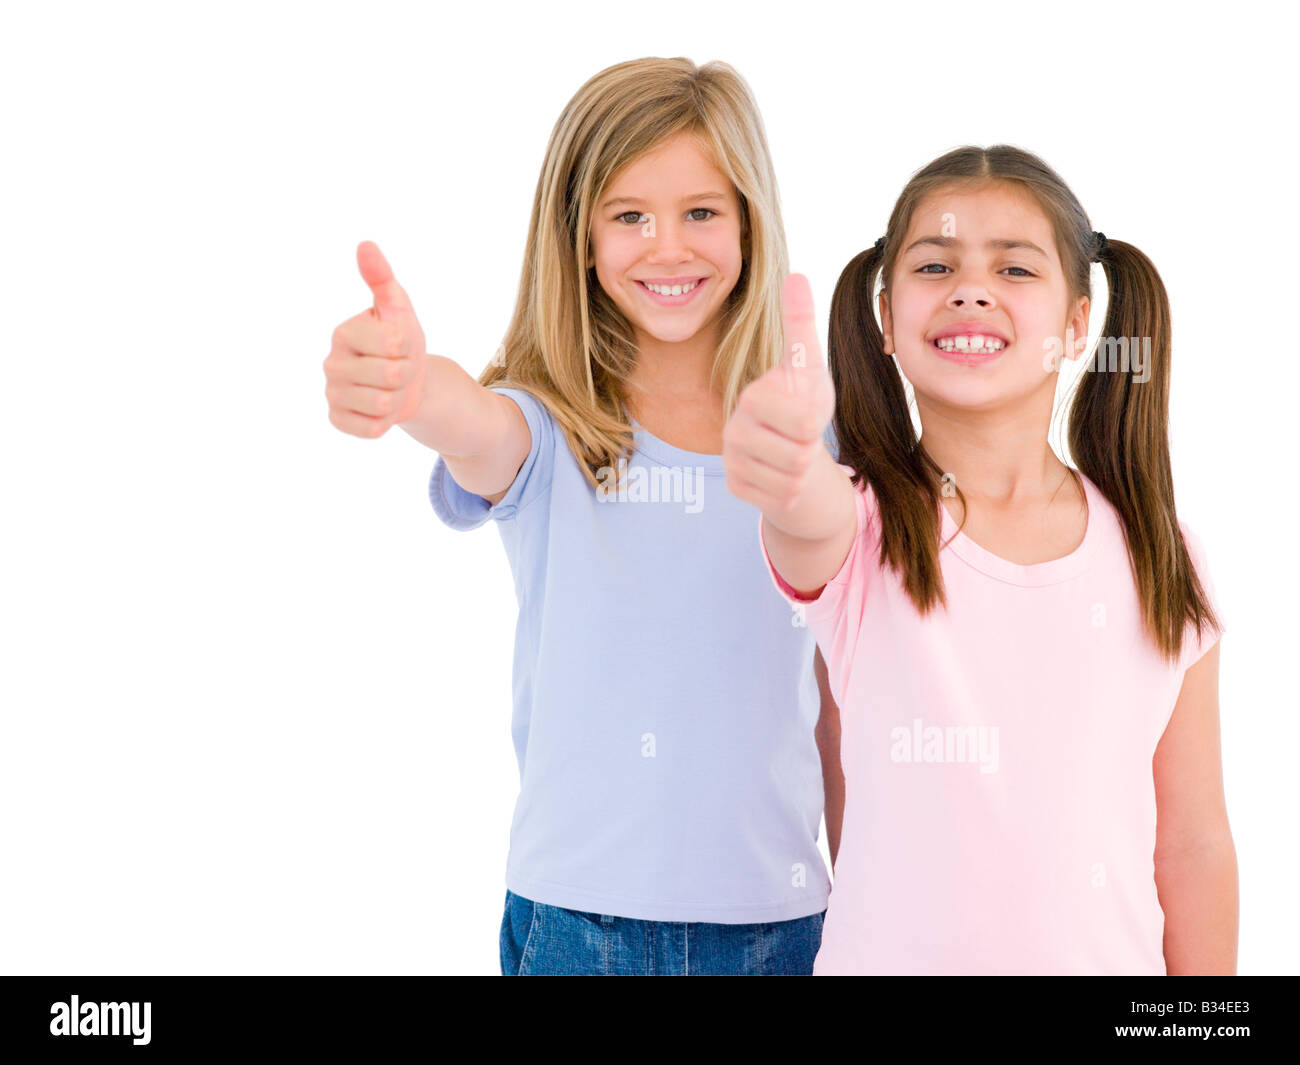 Two girl friends giving thumbs up smiling Stock Photo